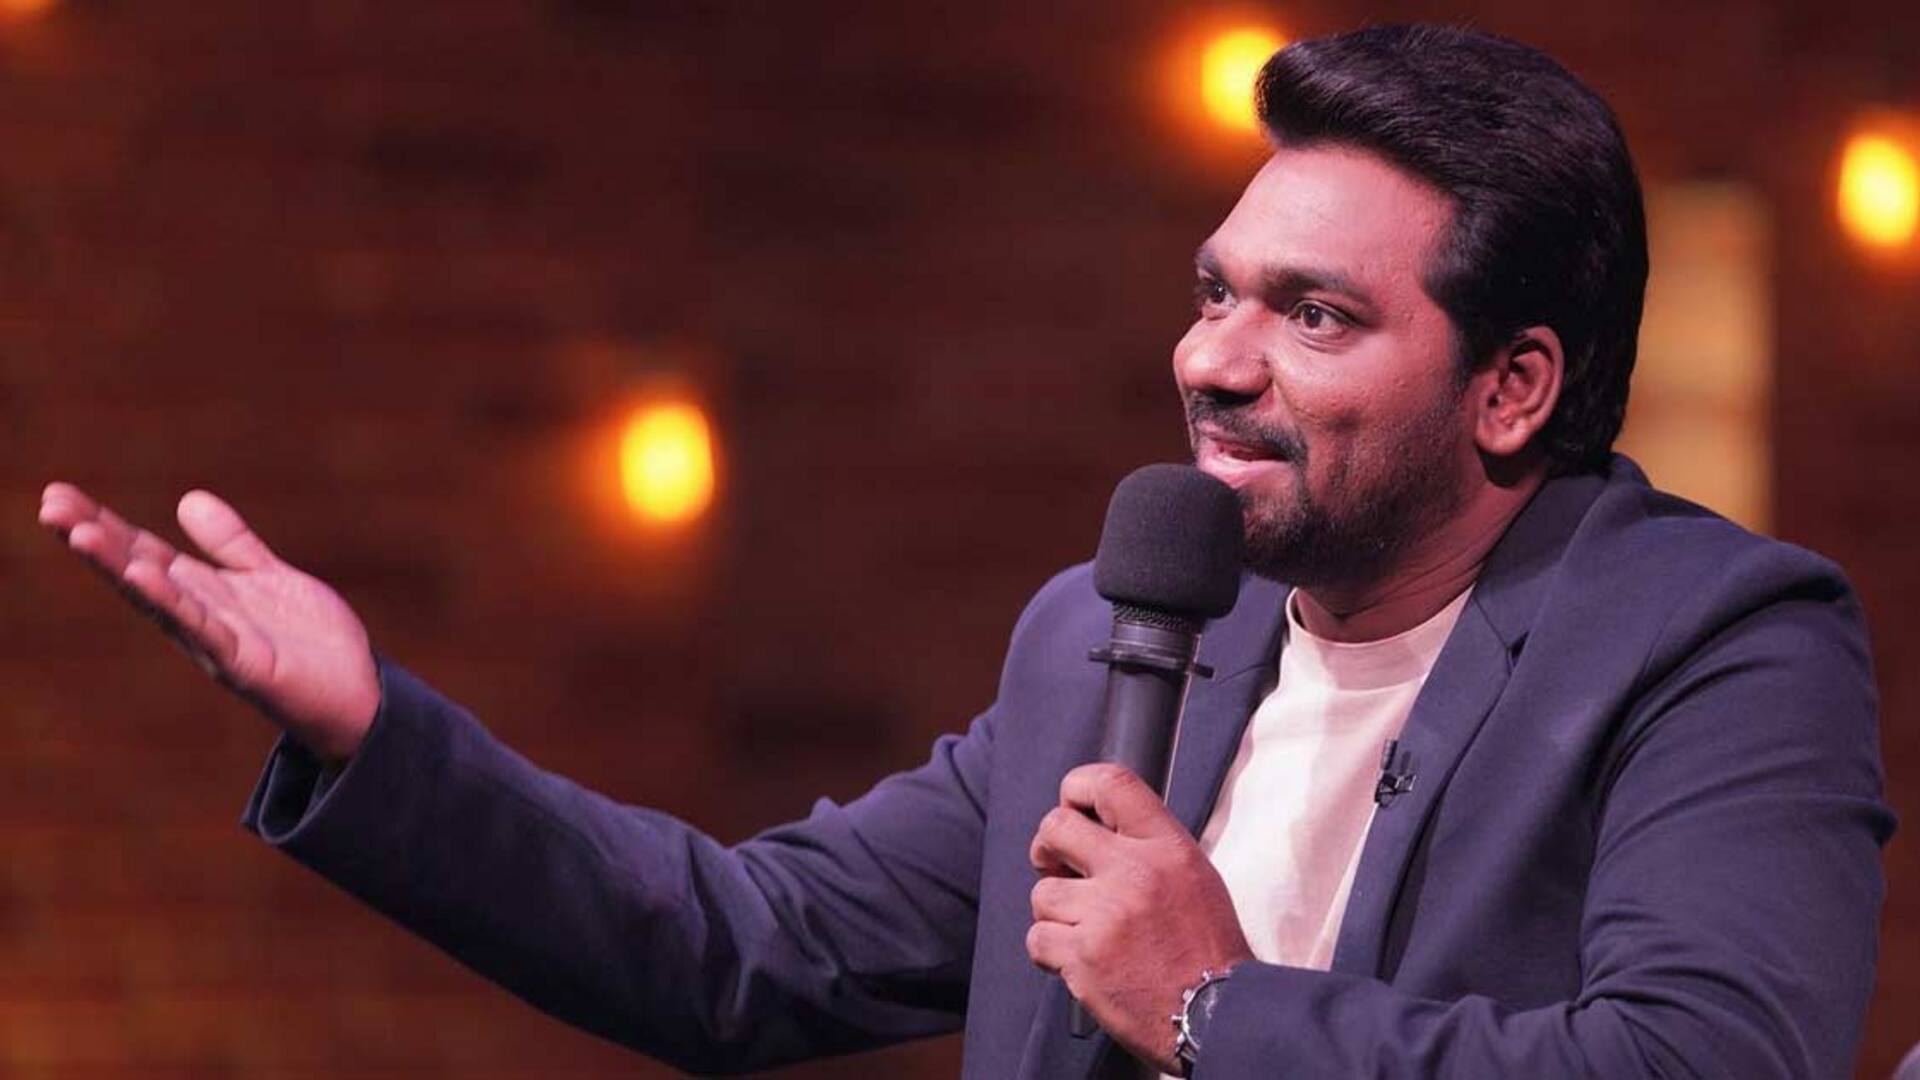 Zakir Khan's stand-up special 'Mann Pasand': When, where to watch